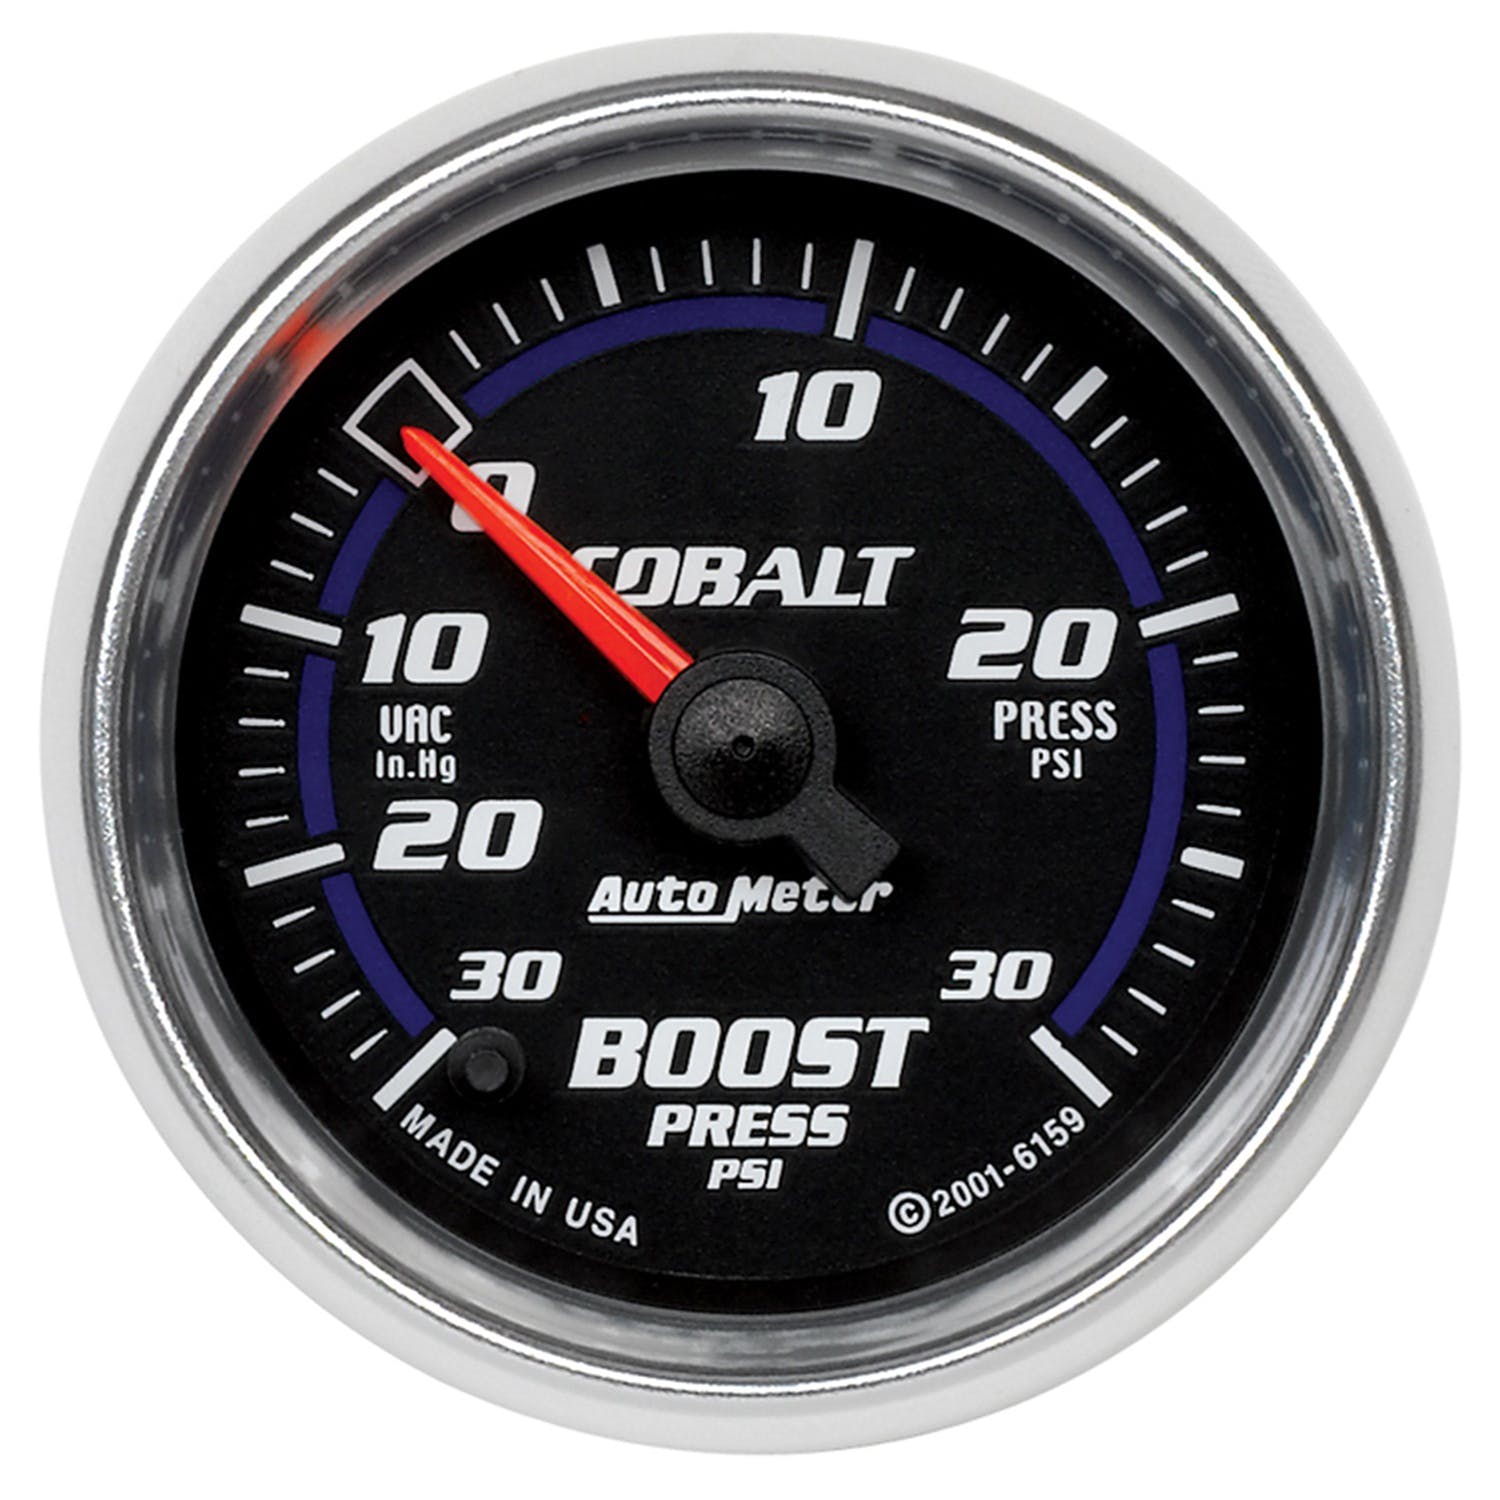 AutoMeter Products 6159 Boost/Vac 30 In. Hg/30 PSI